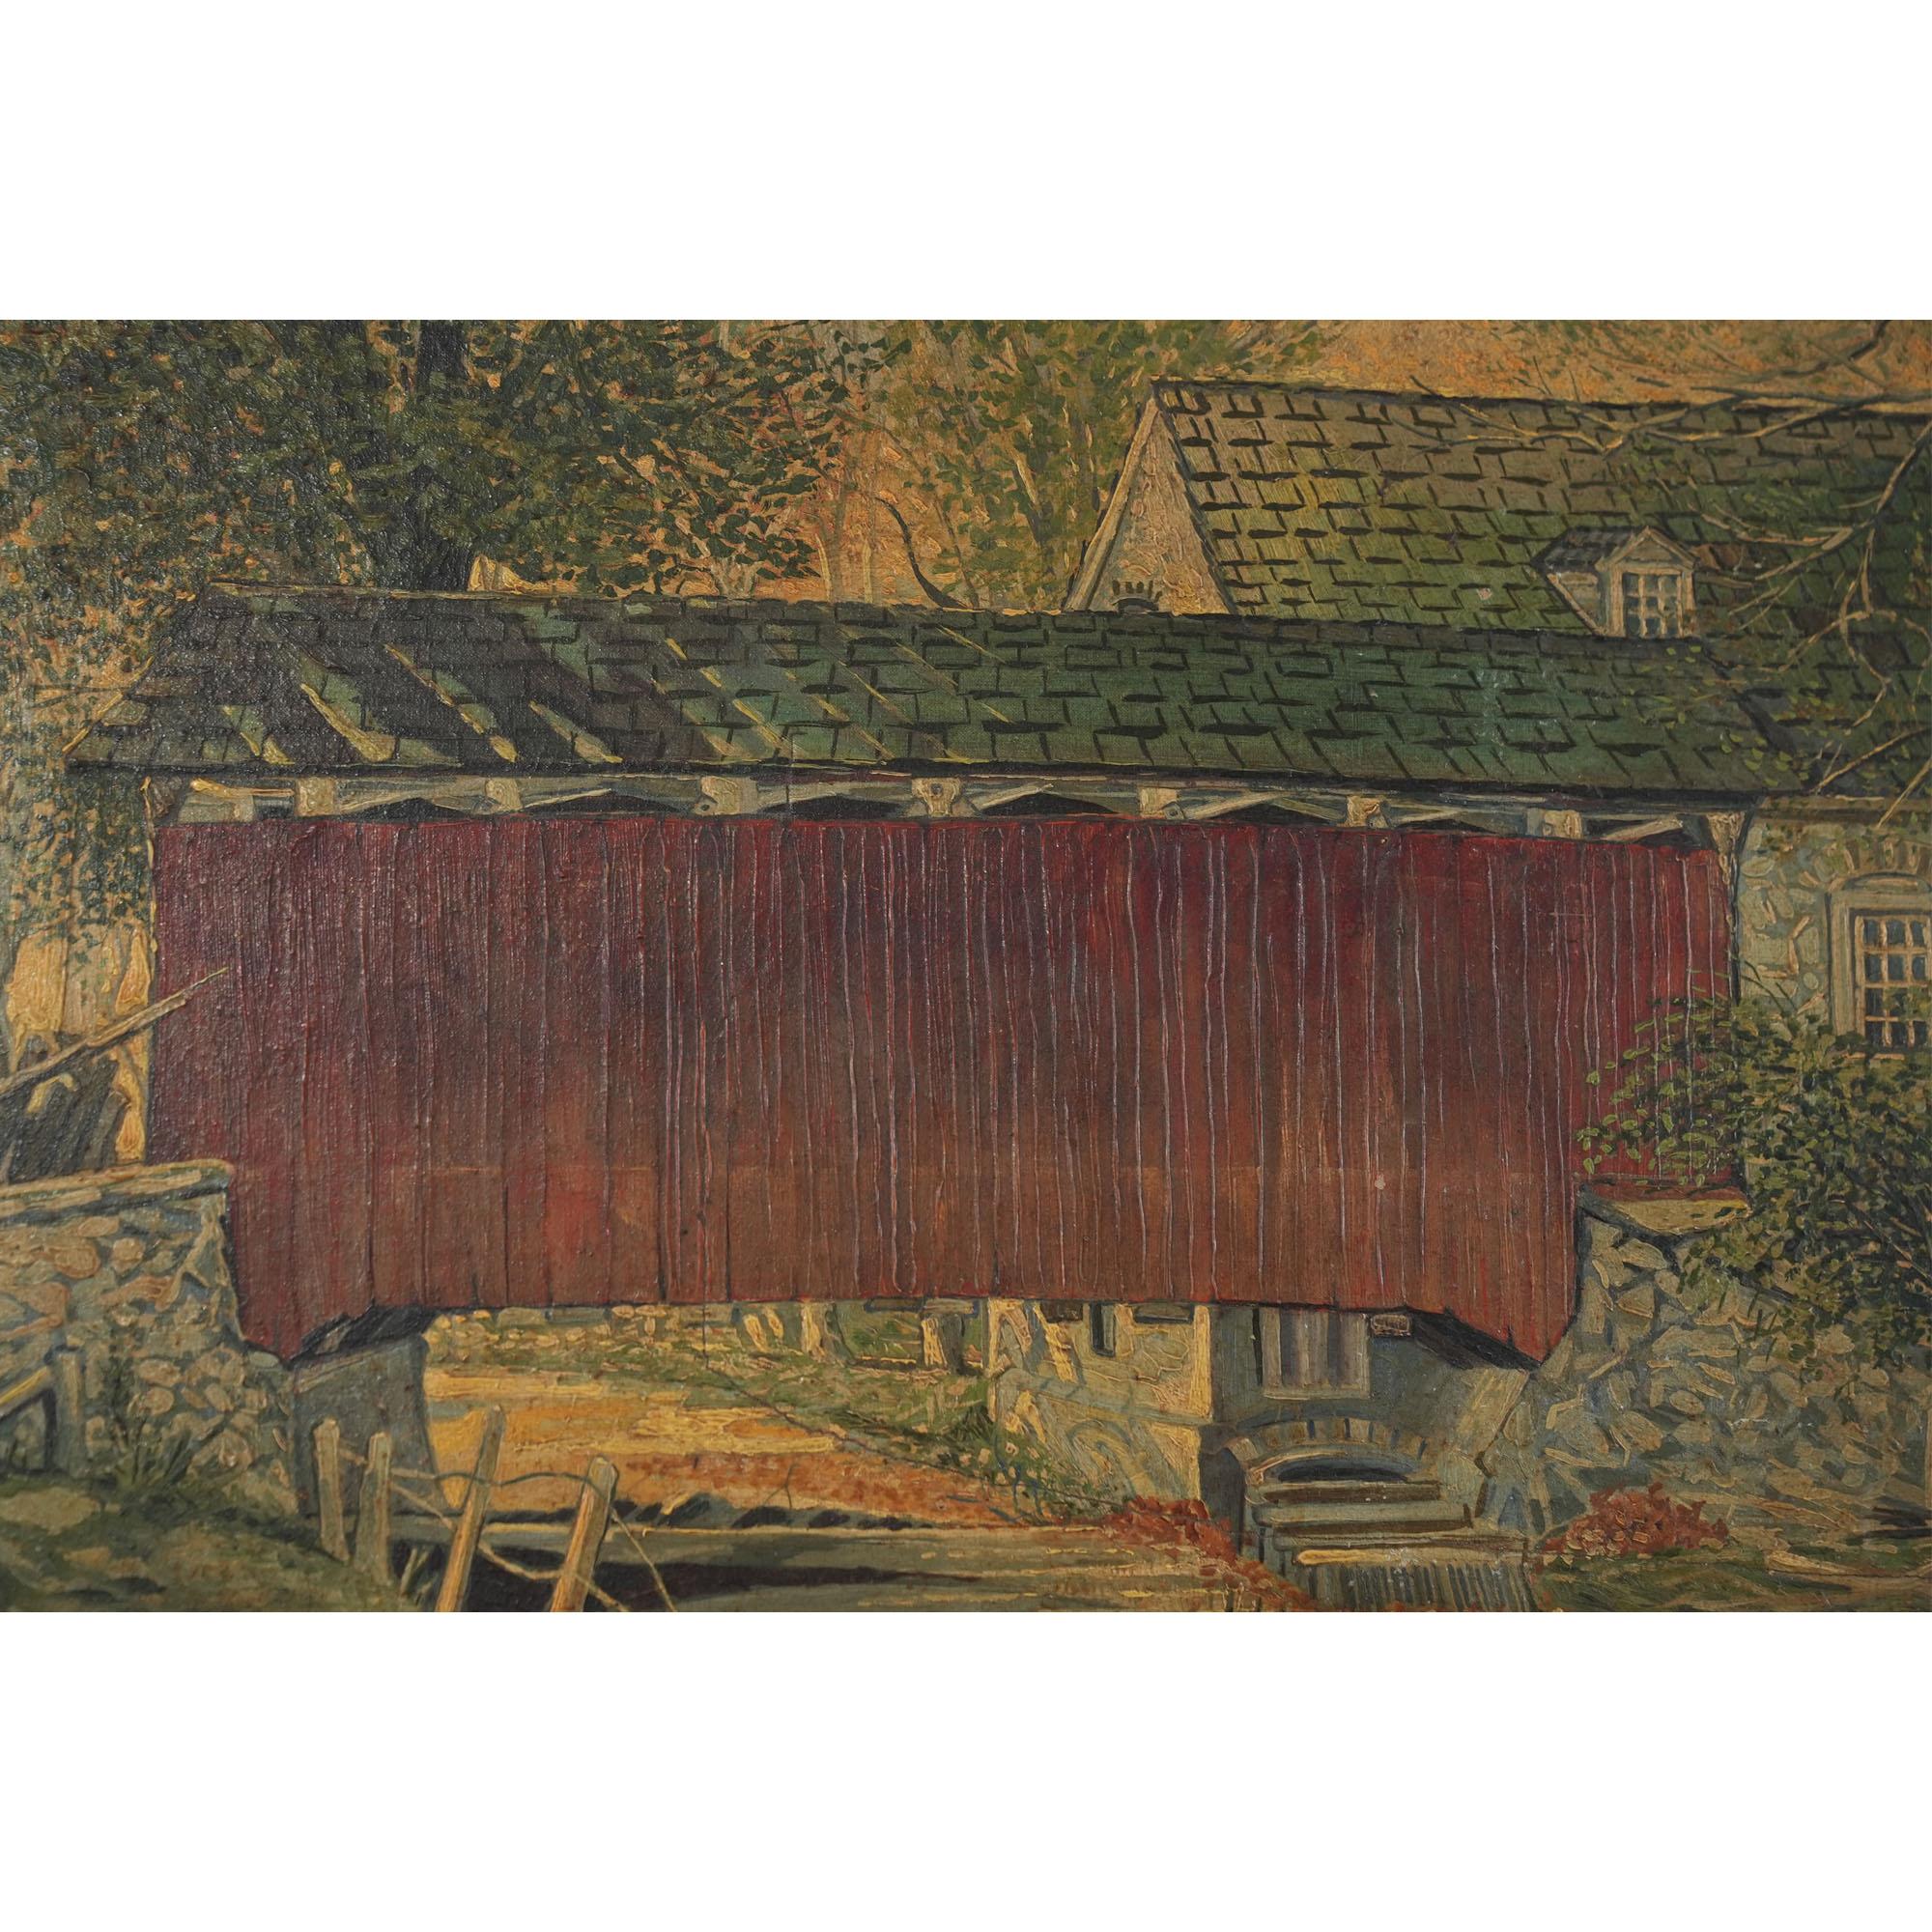 Lancaster Covered Bridge Original Oil Painting In Good Condition For Sale In Annville, PA